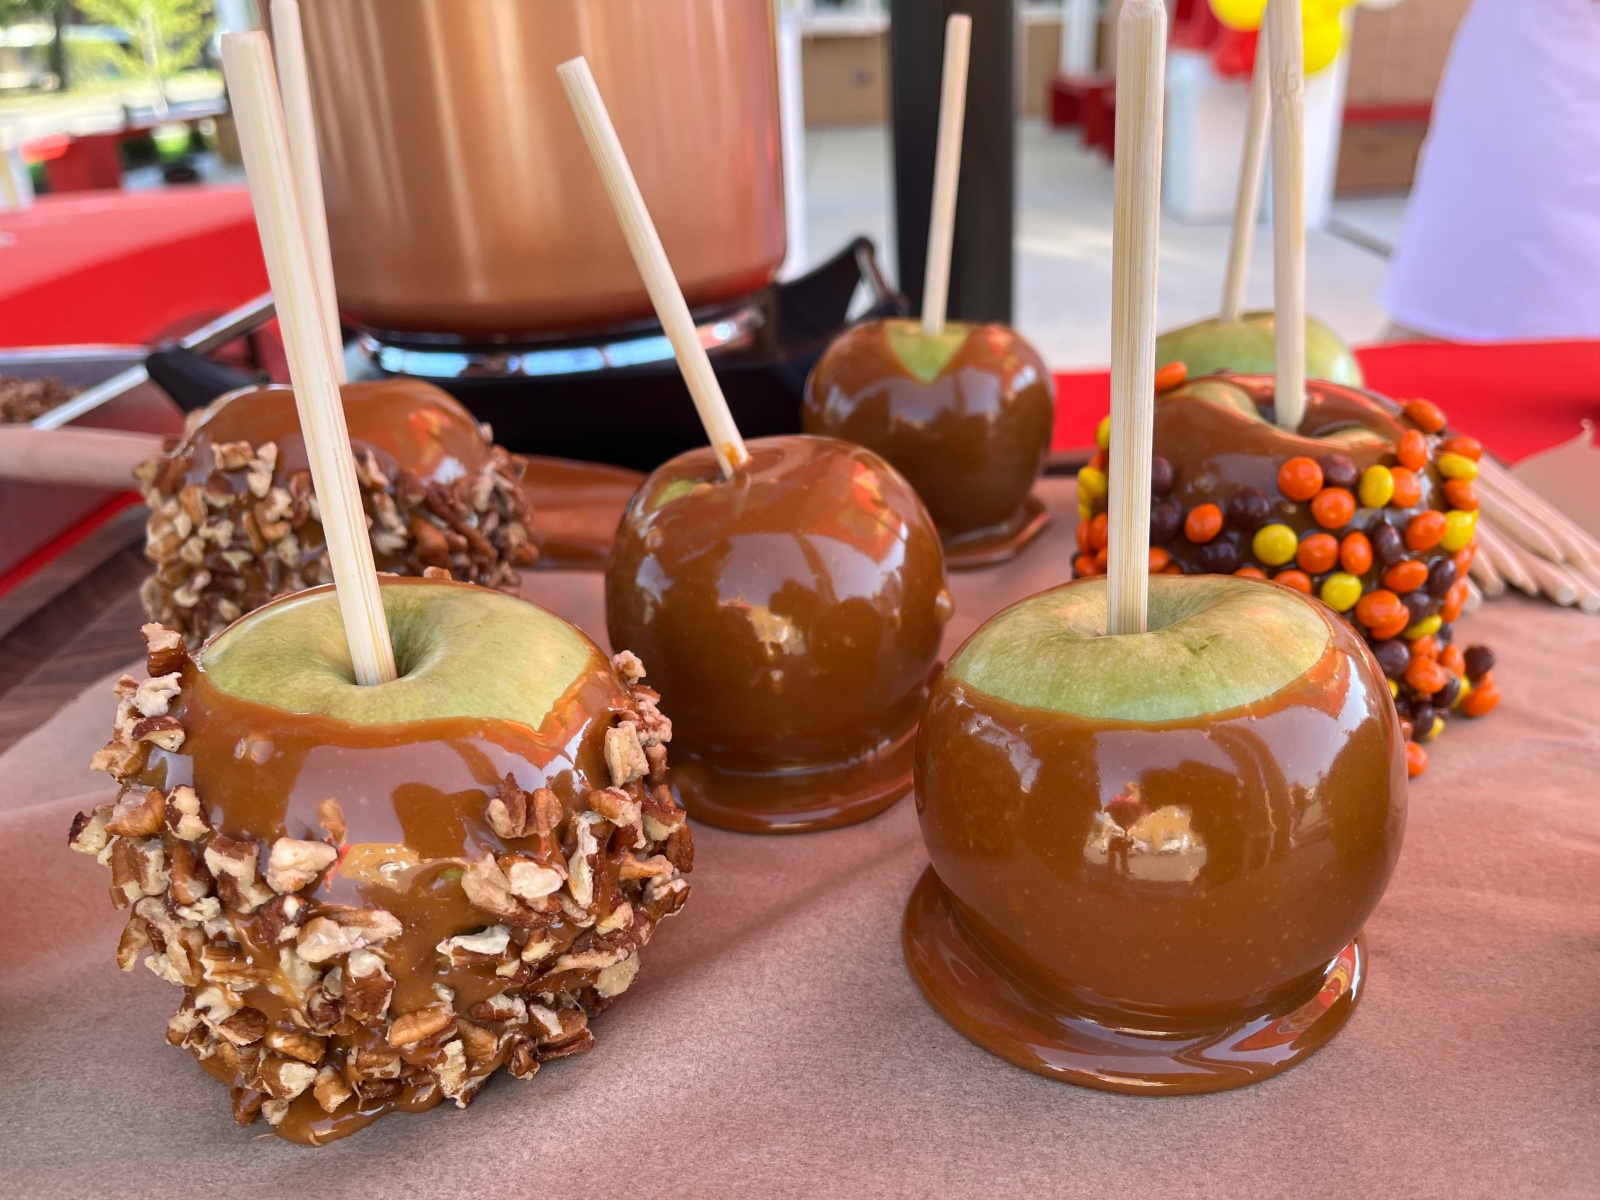 A tray of hand-dipped caramel apples from Andy's Frozen Custard